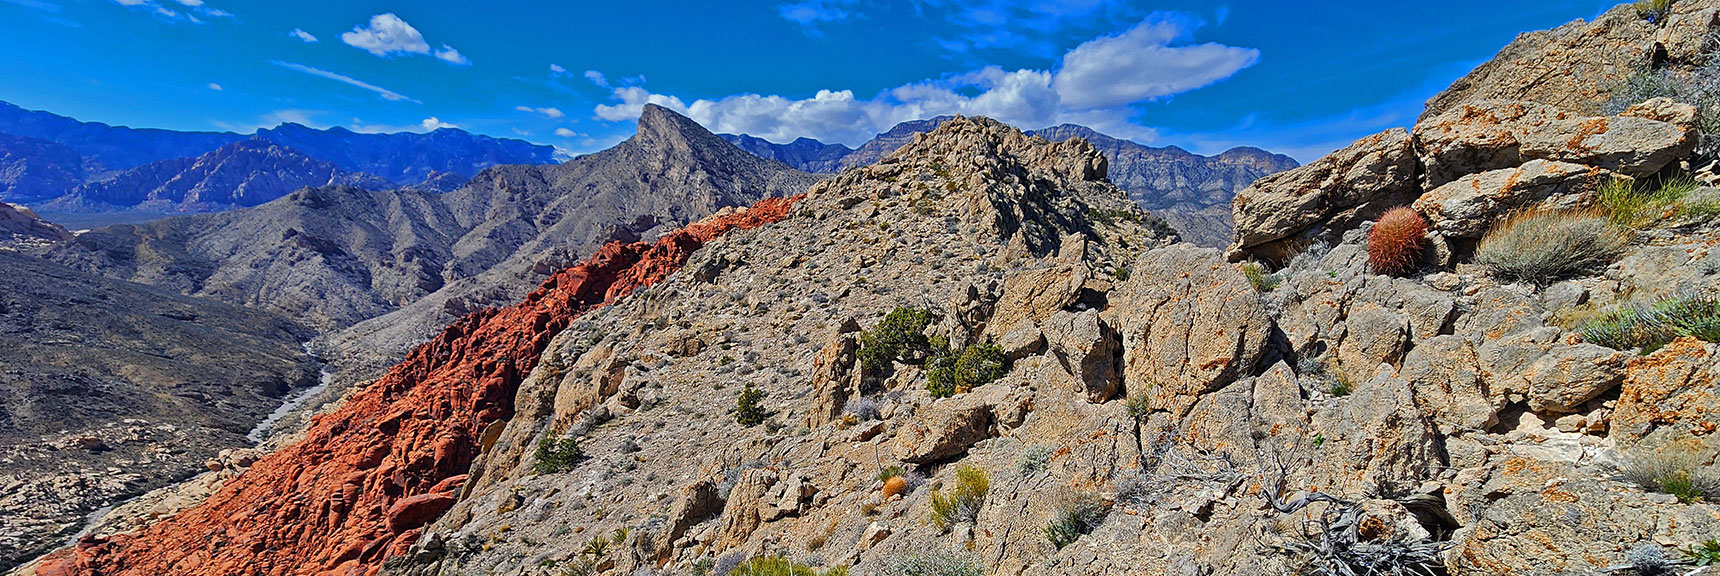 Rounding Last High Point Before Brownstone Descent Slope. | Gray Cap Ridge / Brownstone Basin Loop | La Madre Mountains Wilderness, Nevada